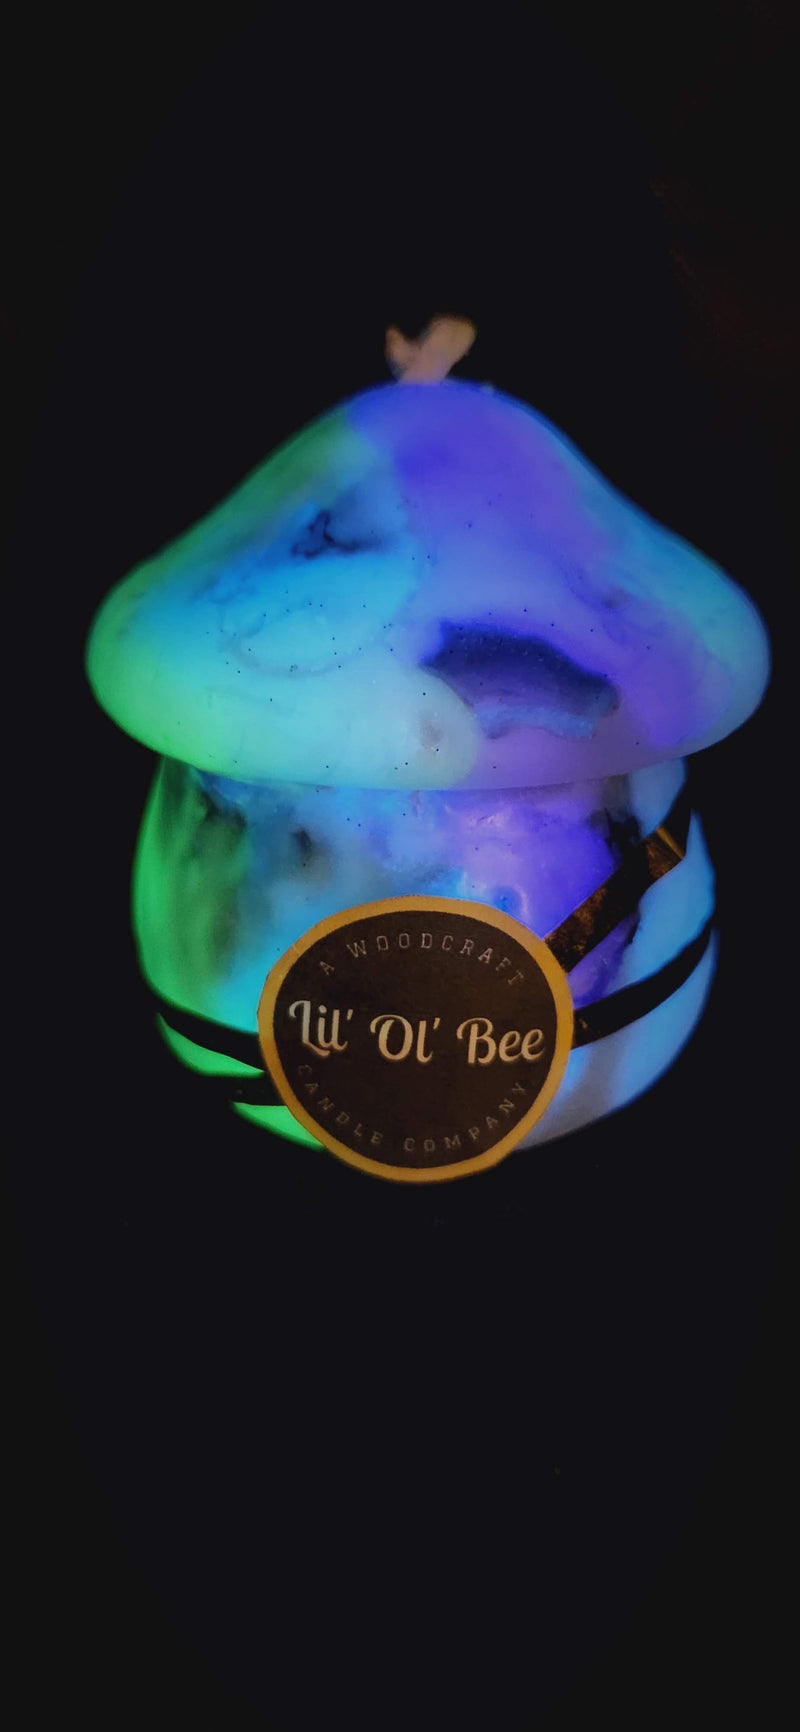 Mushroom Marbled Glow In The Dark Beeswax Candle